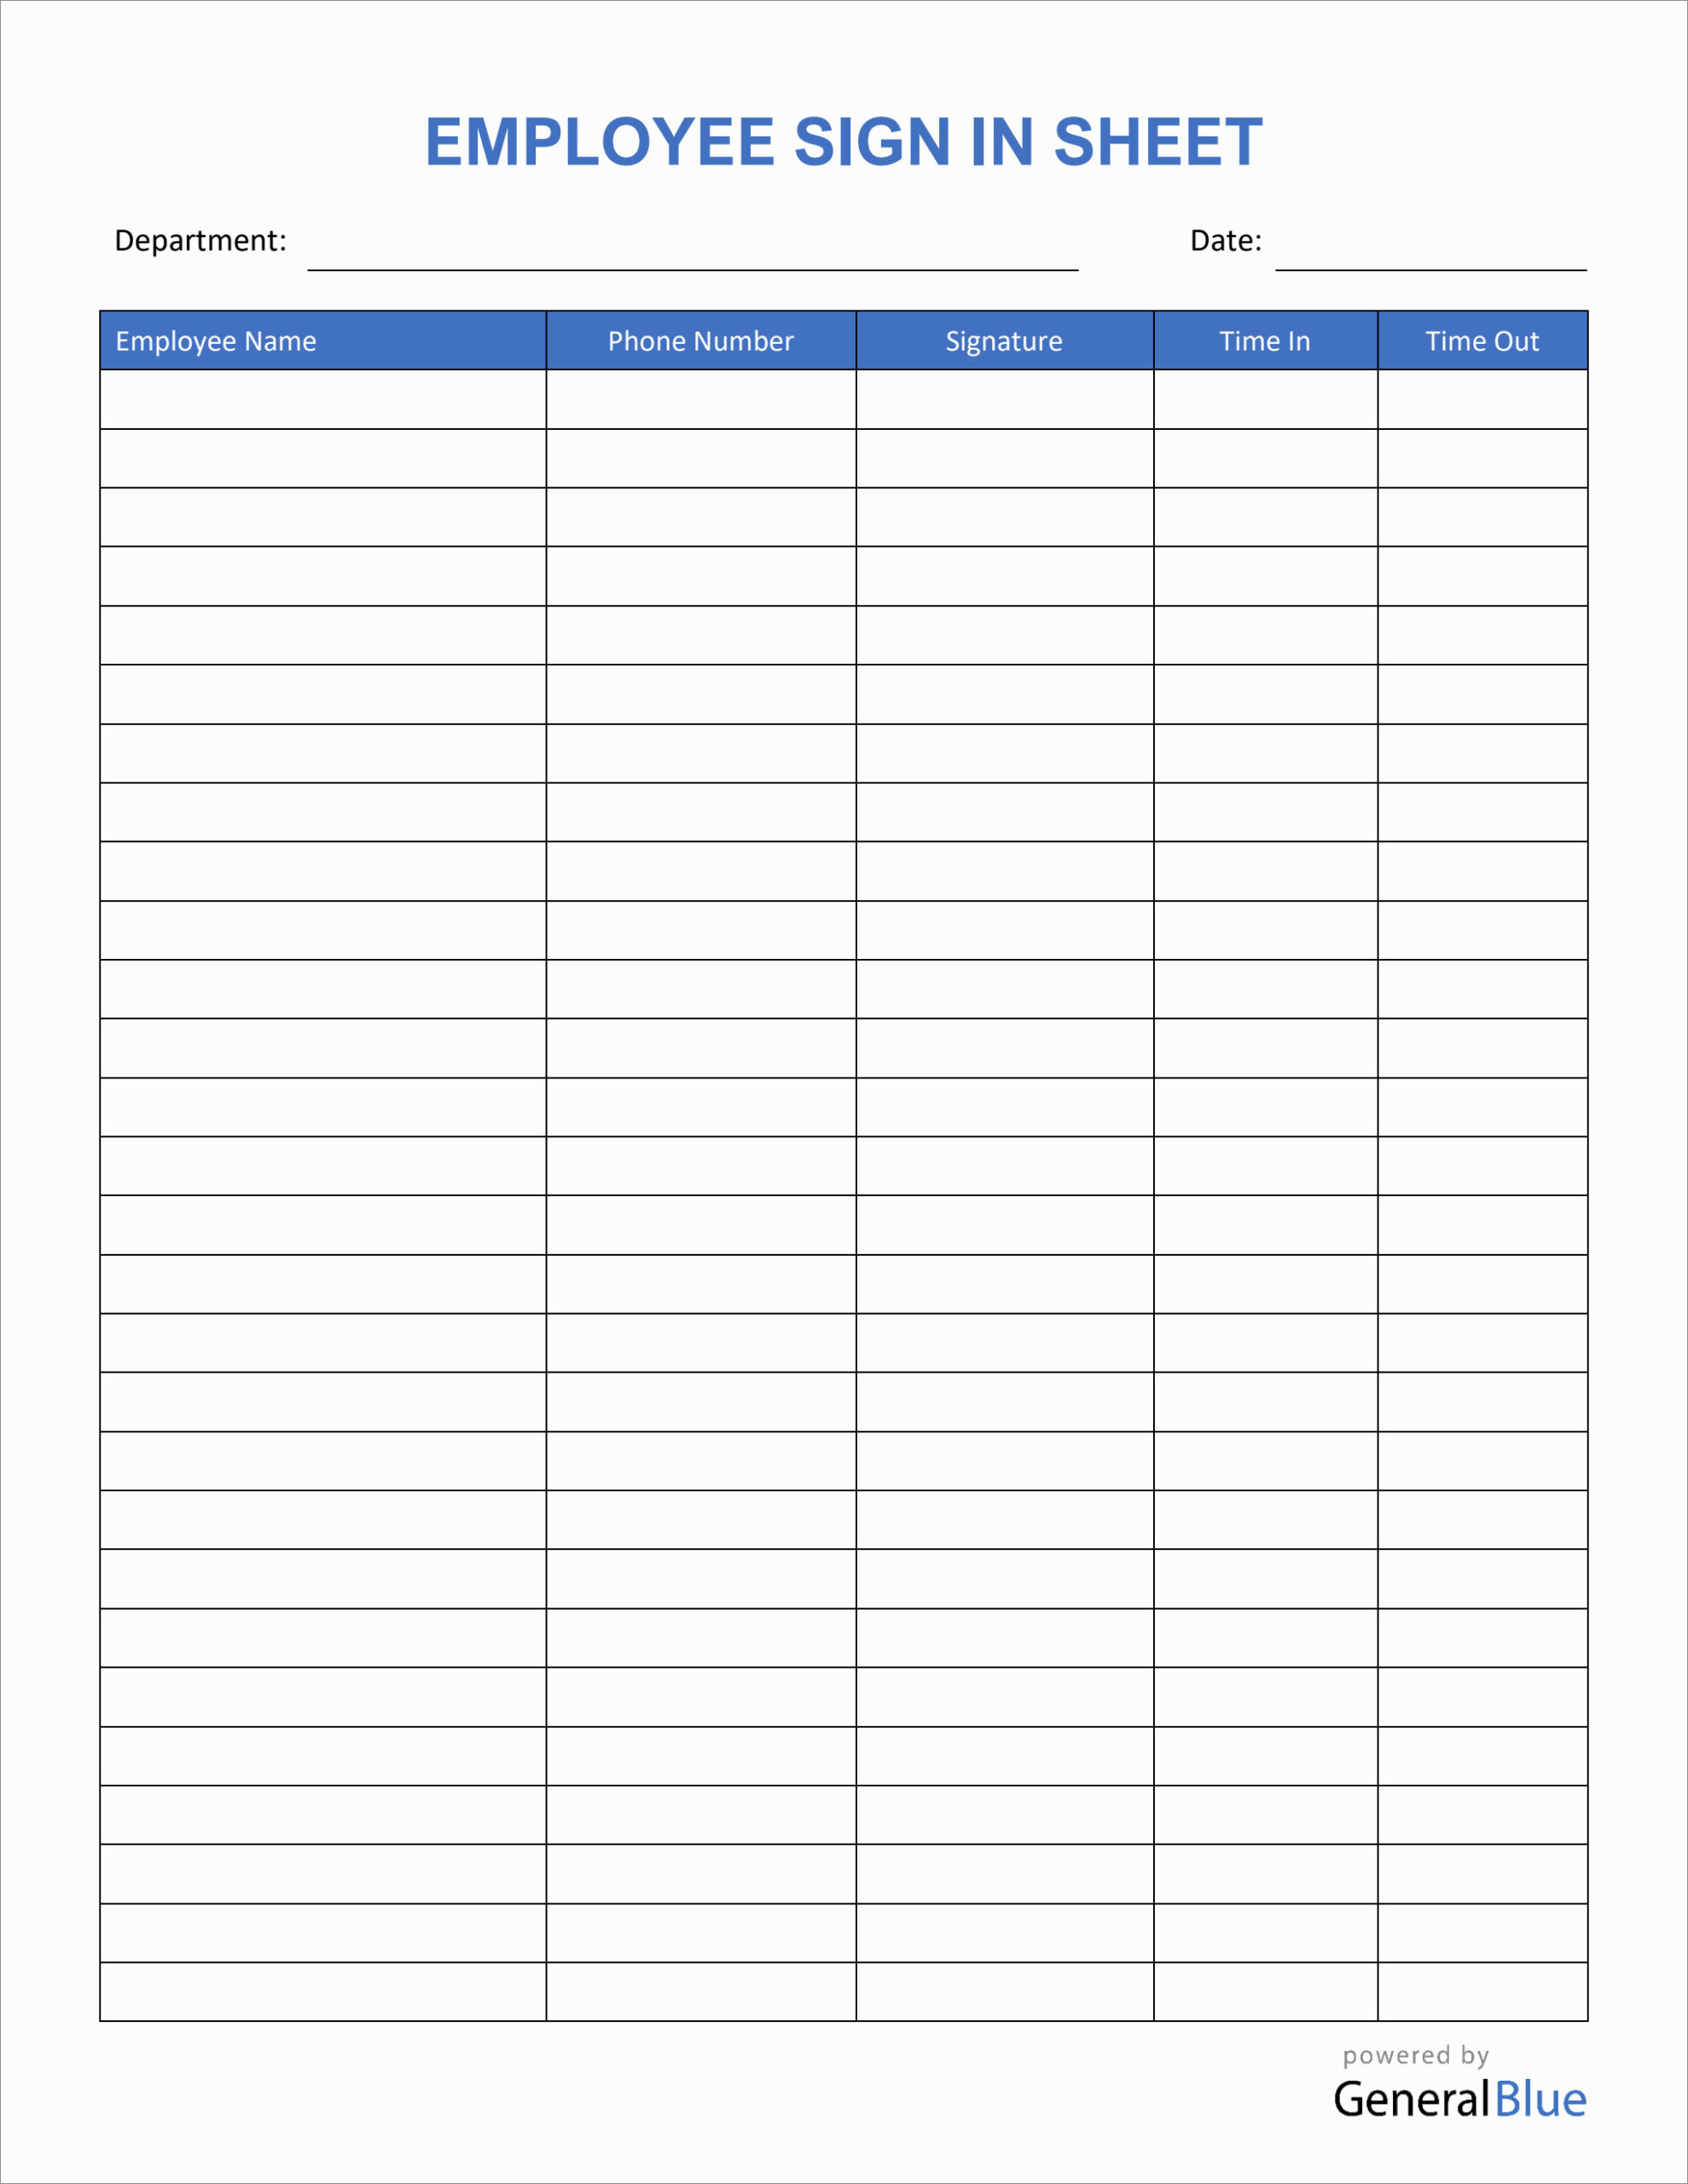 sample of employee sign-in sheet template